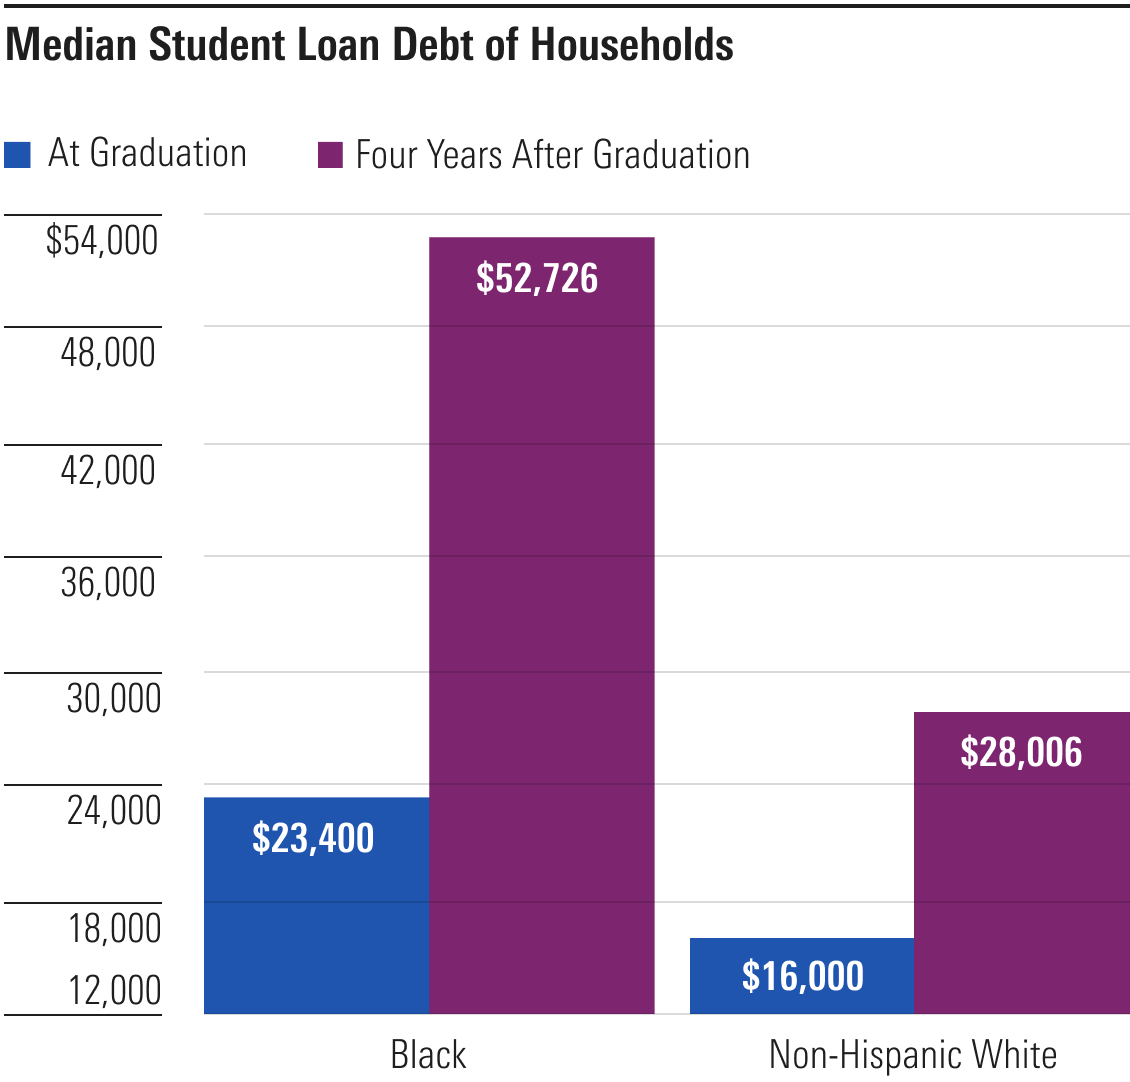 A bar graph displays median student loan debt, depicting higher totals at both graduation and four years later for Black graduates compared to Non-Hispanic White graduates.